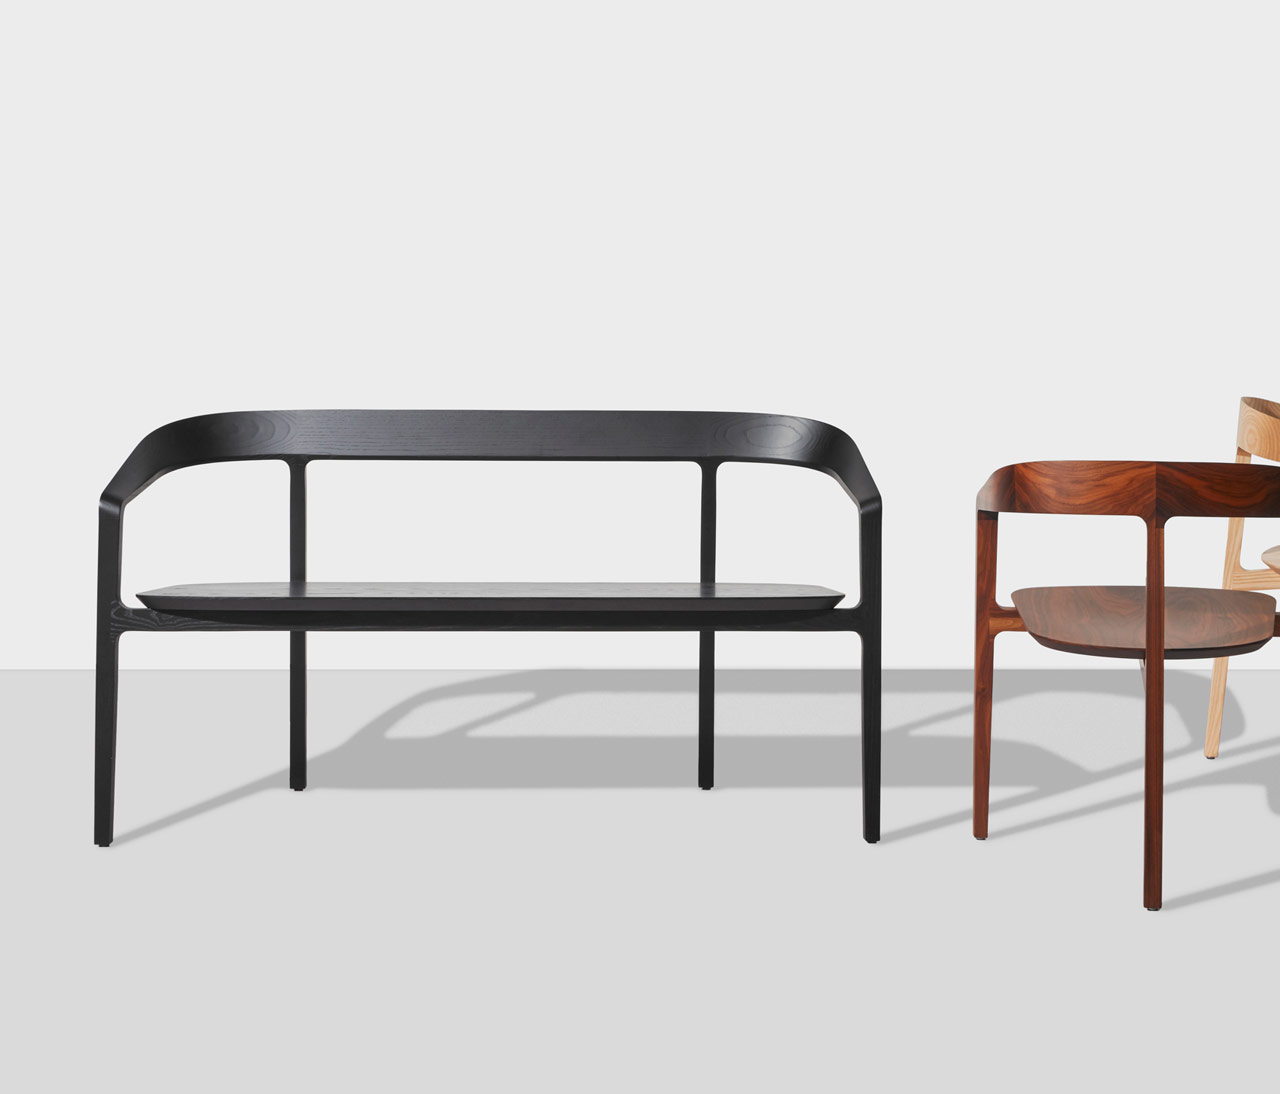 Tom Fereday’s DesignByThem Collection Expands with the Bow Bench